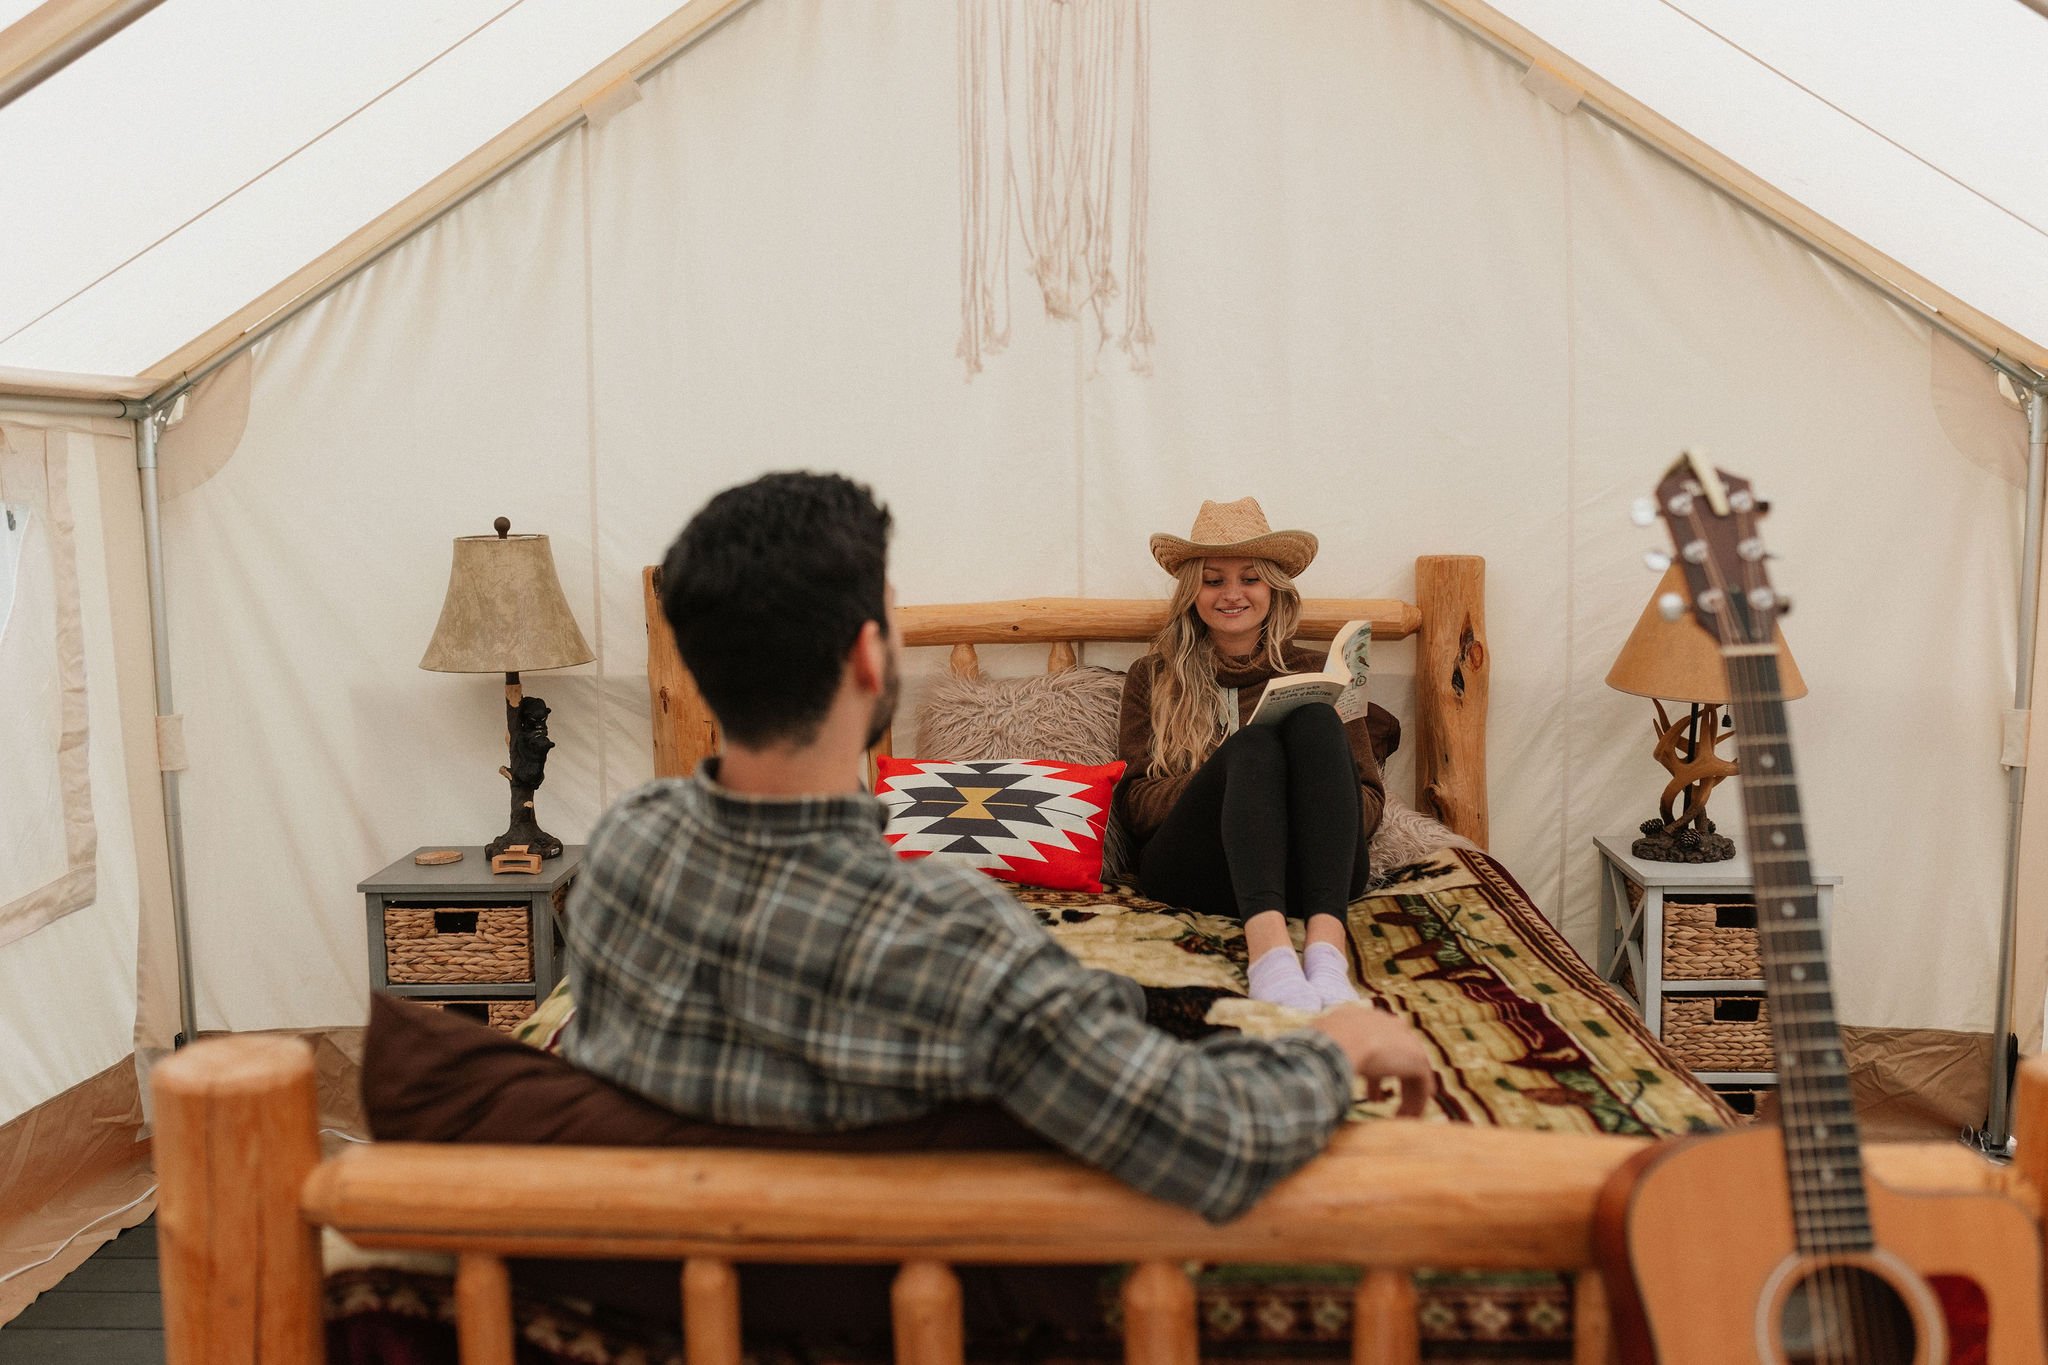 The Ranch Hand Glamping Tent at The Hohnstead Glamping Cabins Resort in Bonner, Montana